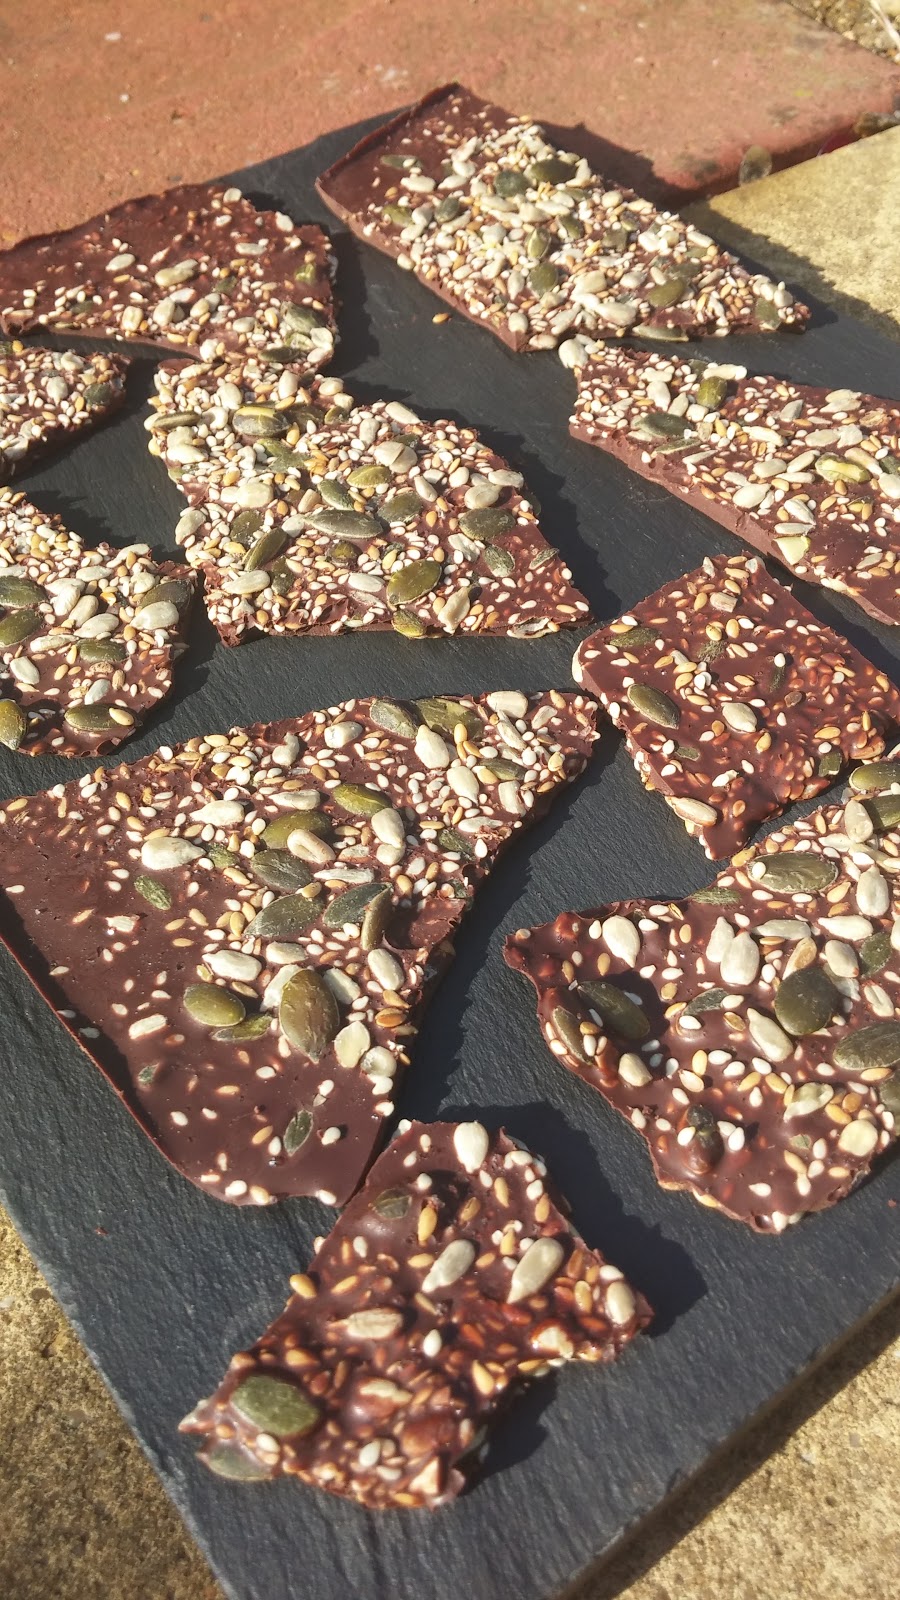 Thin pieces of dark chocolate enhanced with sea salt and mixed seeds